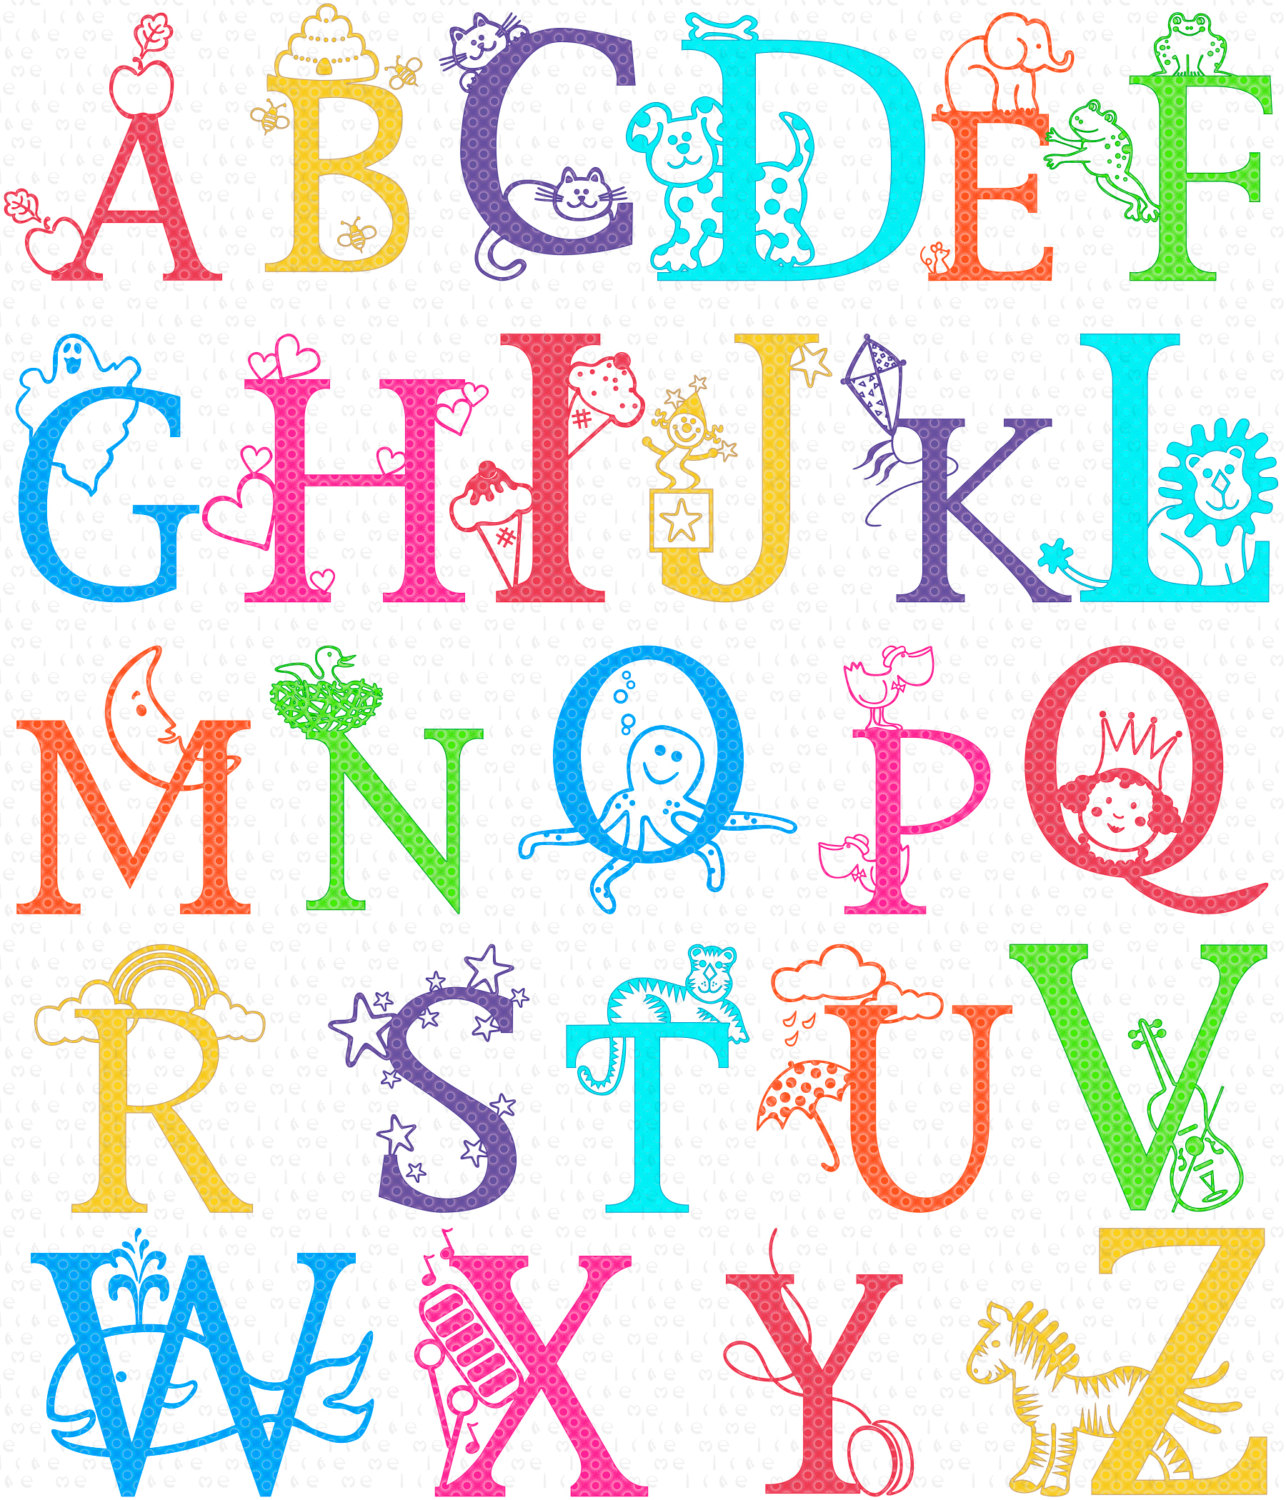 free-images-of-the-alphabet-download-free-images-of-the-alphabet-png